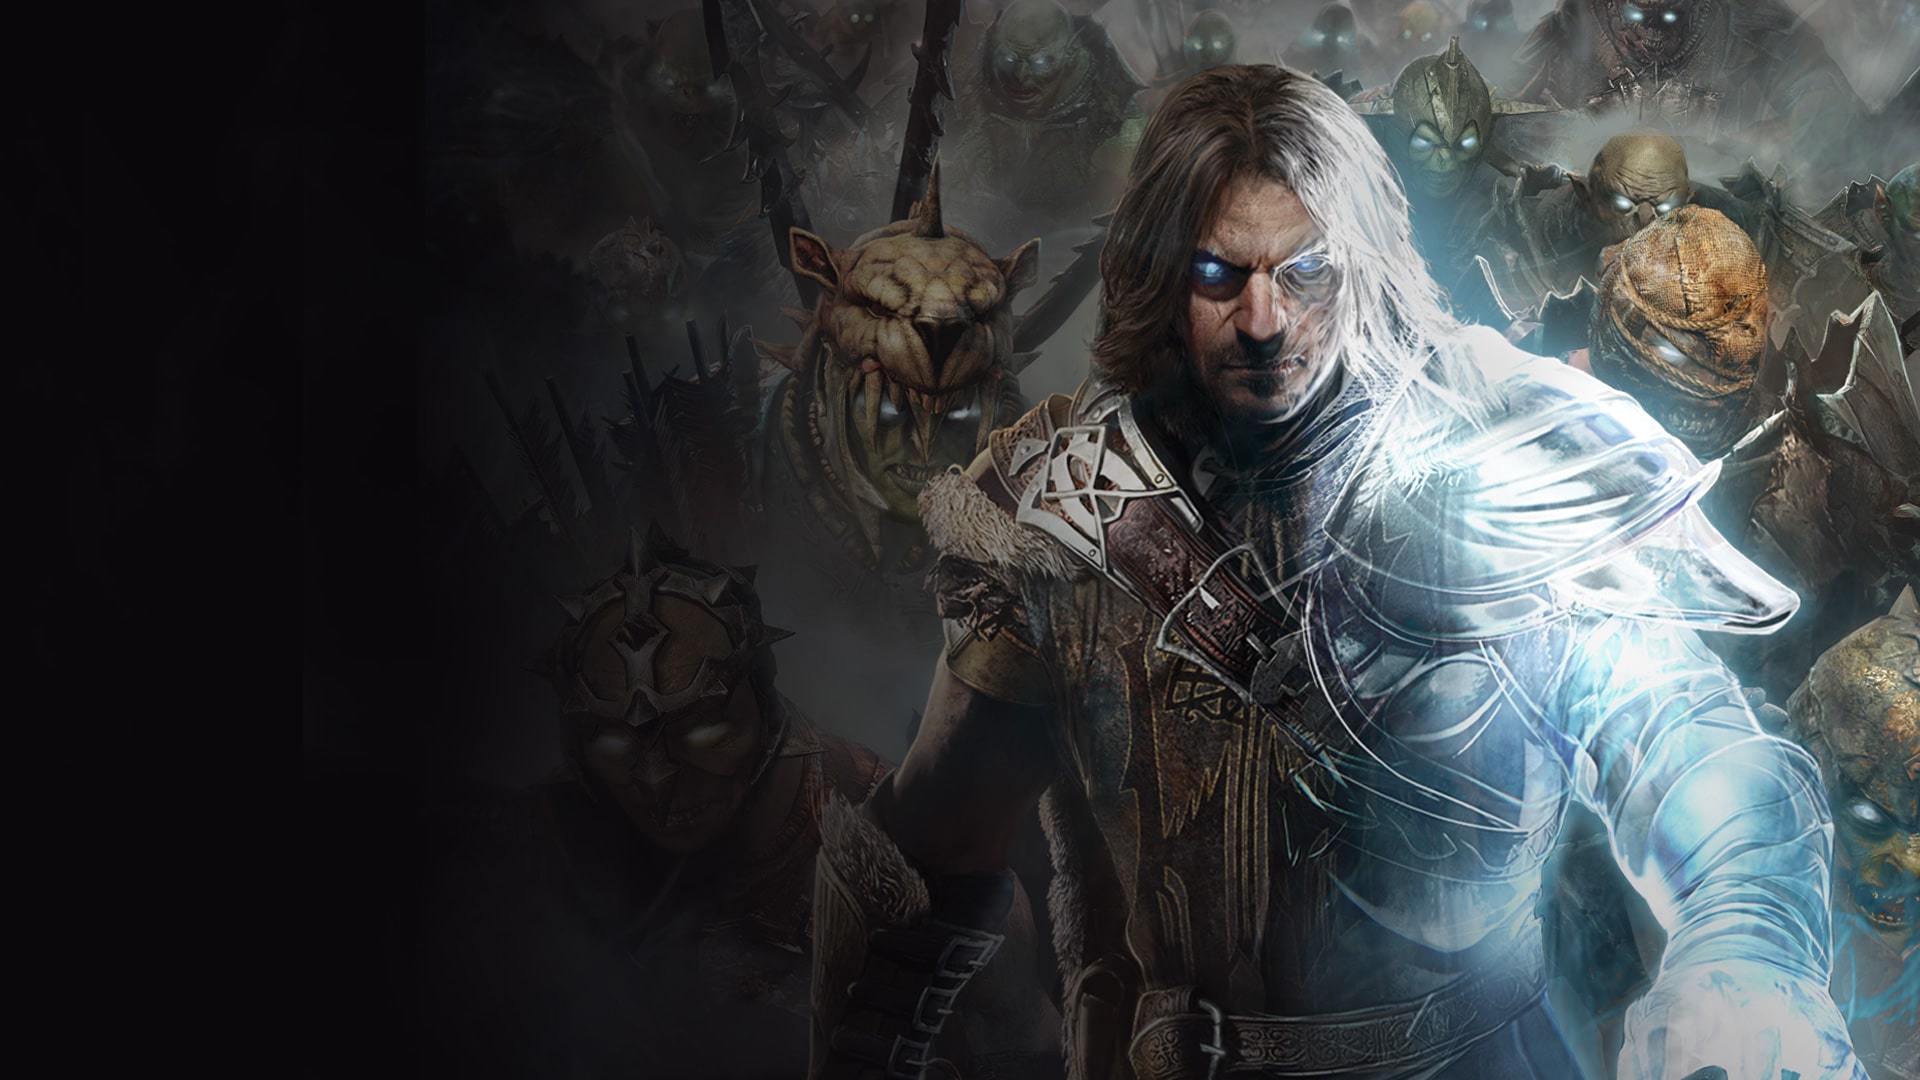 Shadow of mordor game. Middle-Earth™: Shadow of Mordor™. Тени Мордора 1. Тени Мордора ps4. Властелин колец Shadow of Mordor.